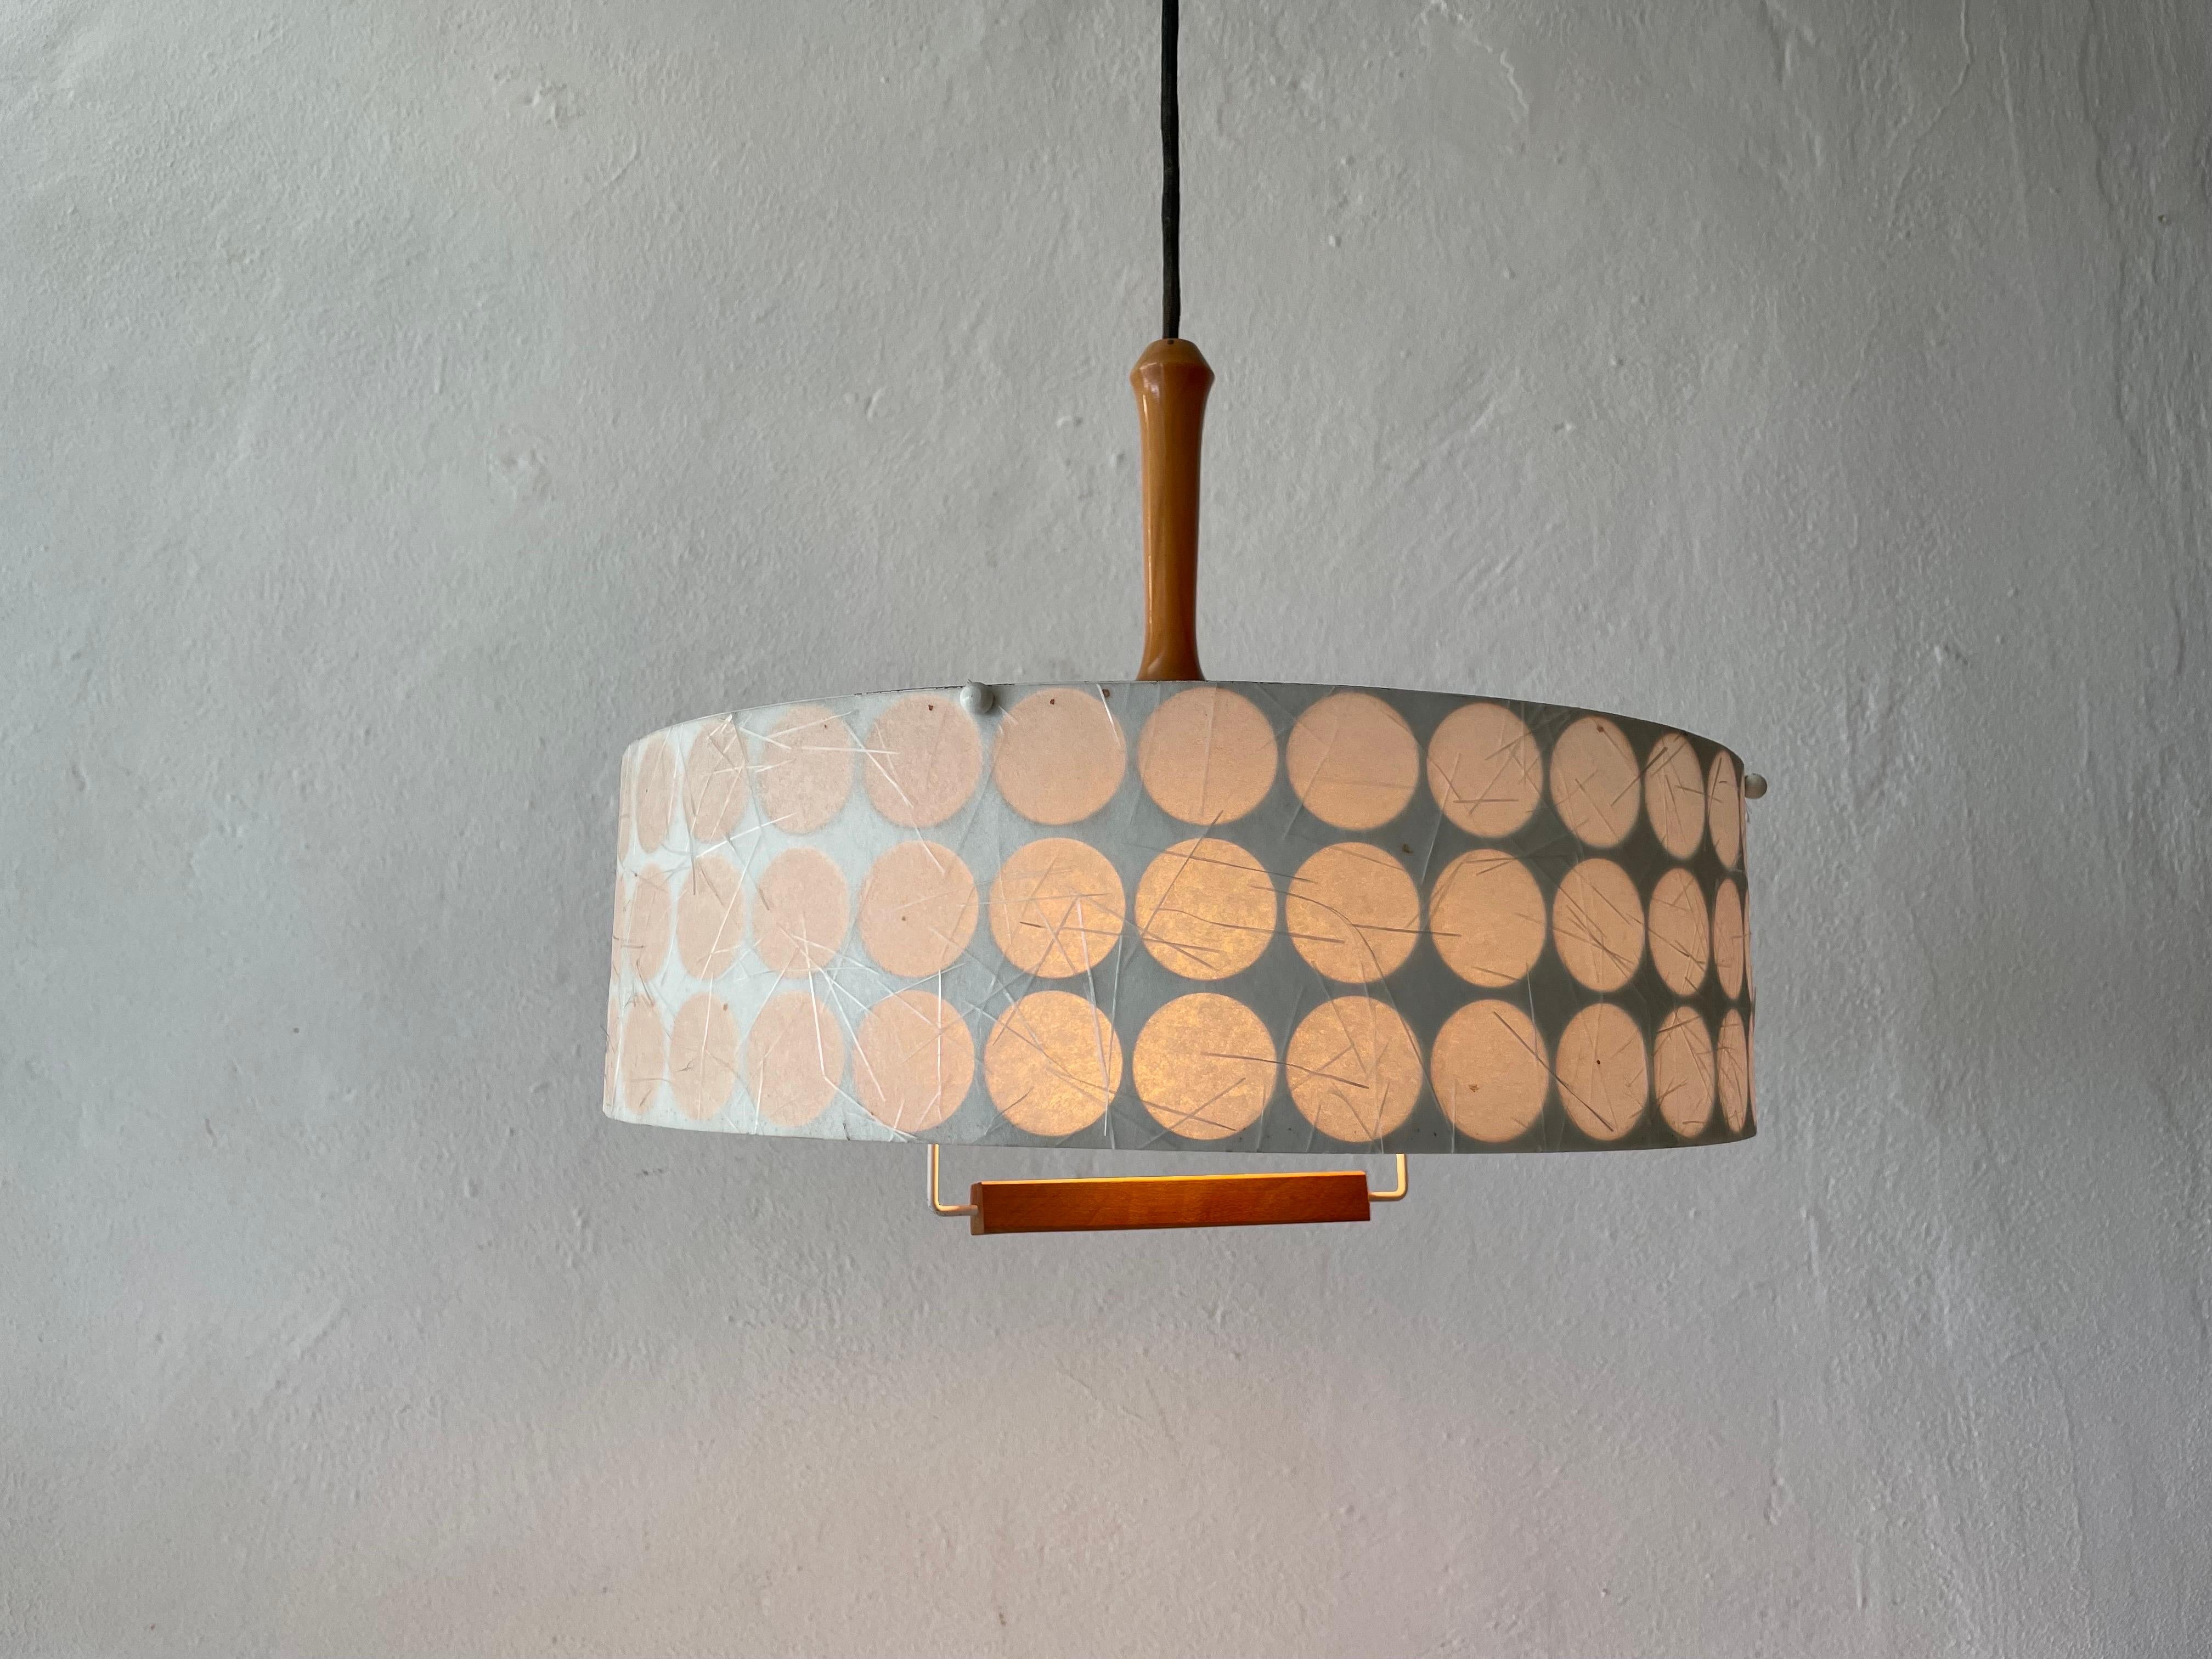 Rare Atomic Shade Pendant Lamp by Temde, 1960s, Switzerland For Sale 3